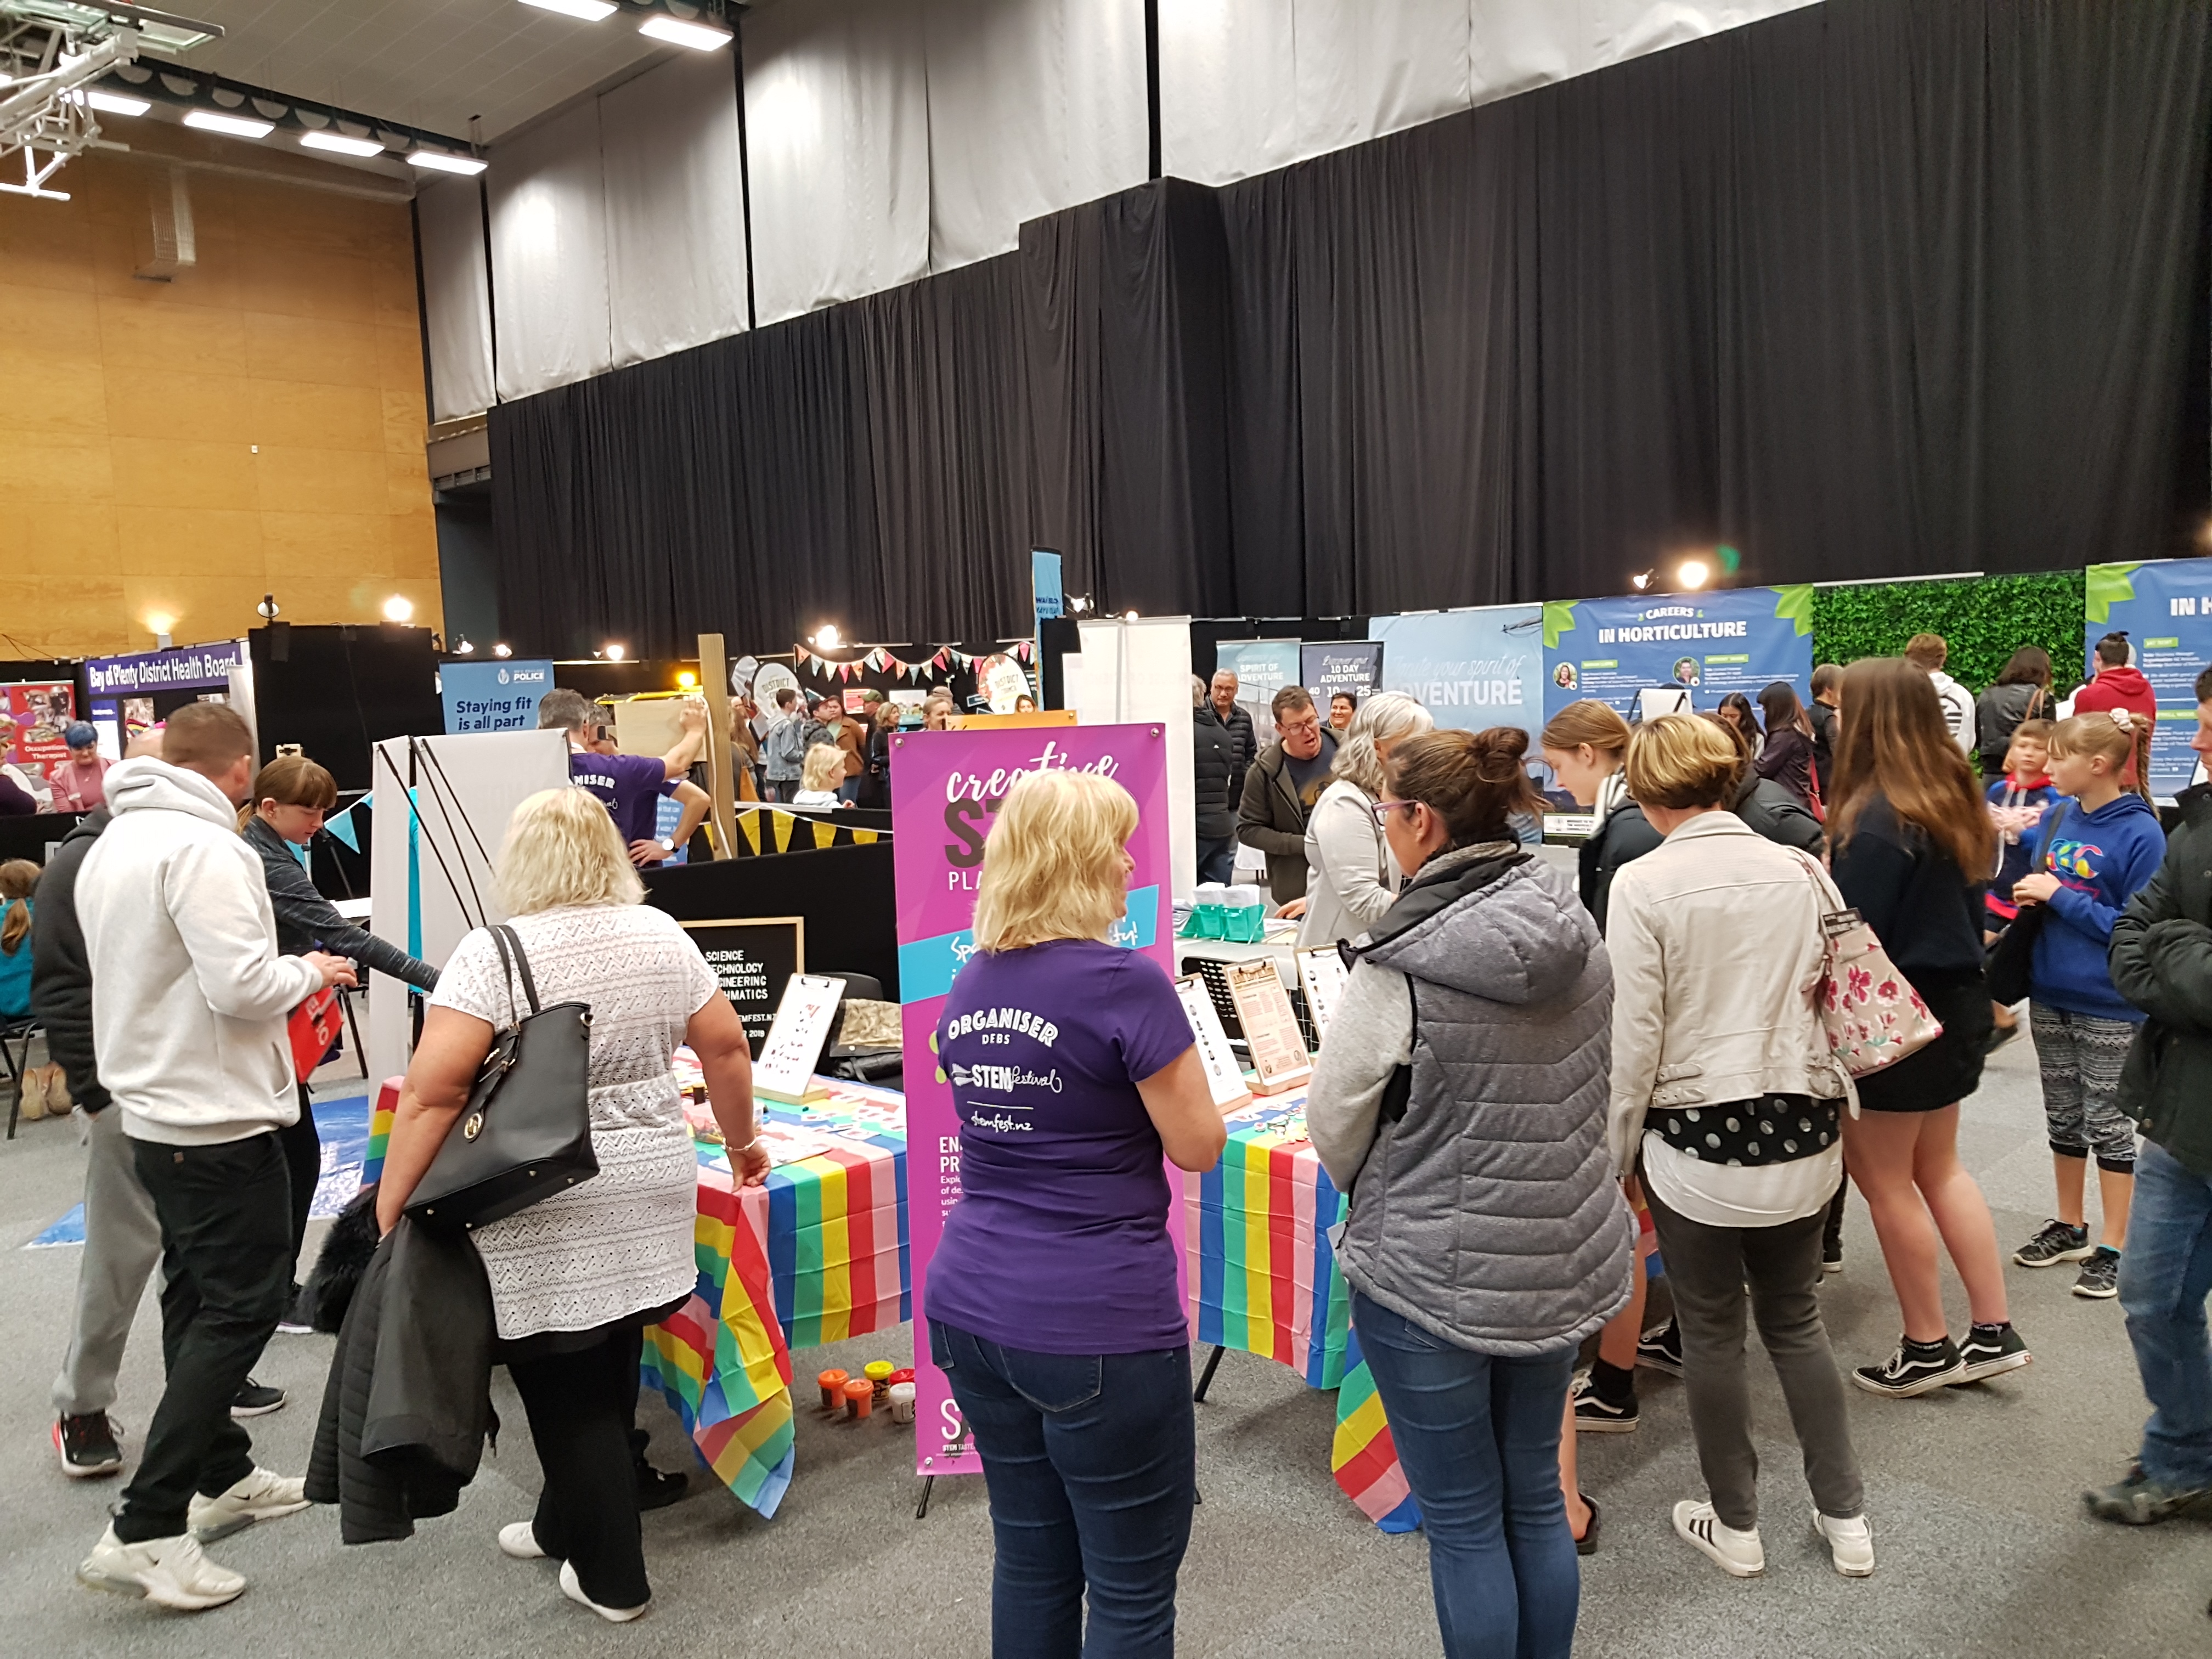 Excitement building for STEMFest at Canvas Career Expo | Tauranga STEM ...